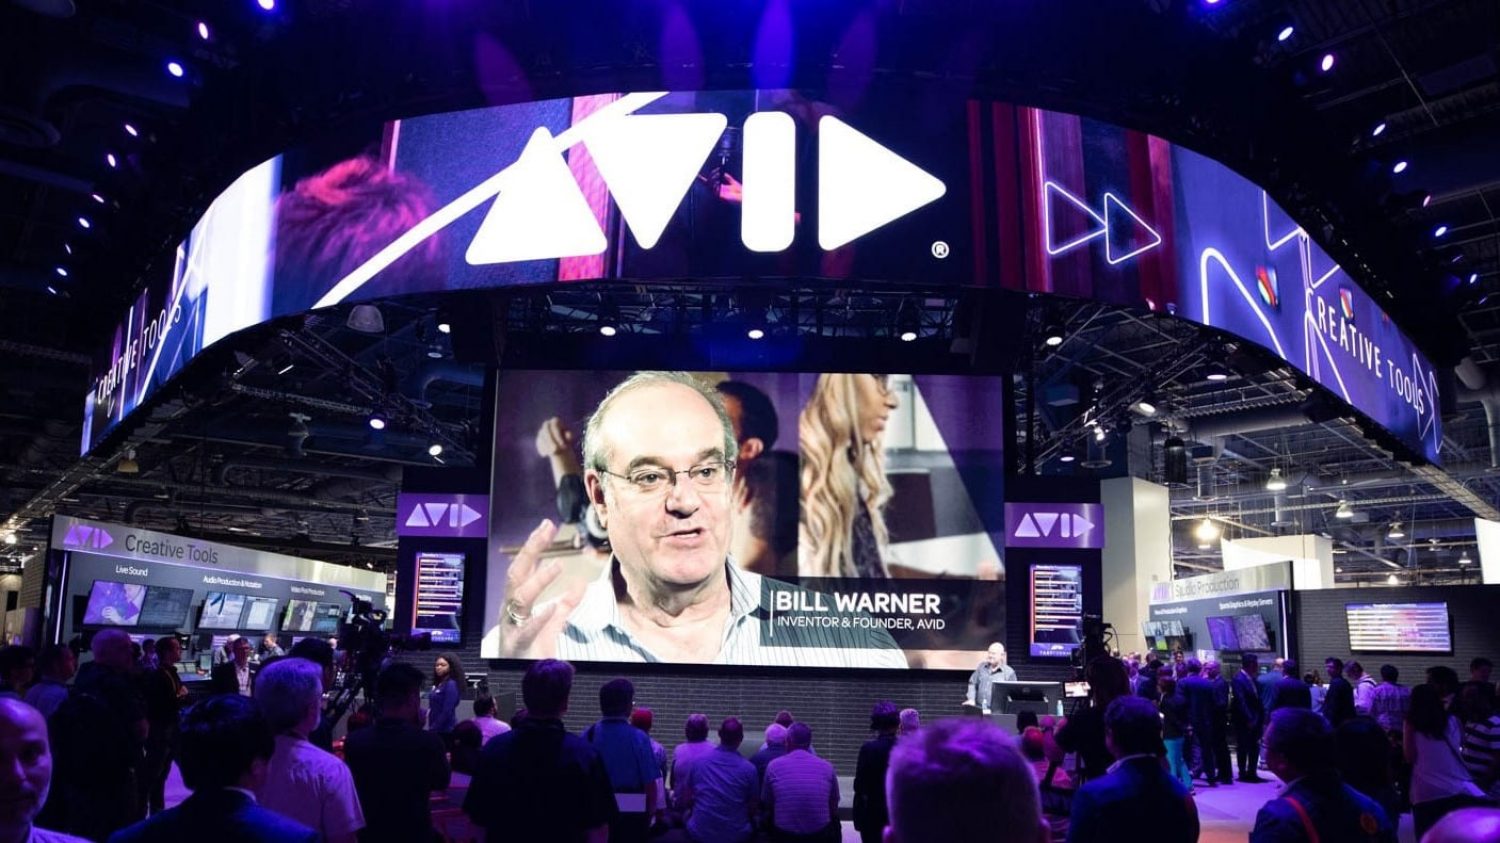 Avid pulls out of all shows for next 60 days due to coronavirus, cancels Avid Connect 2020